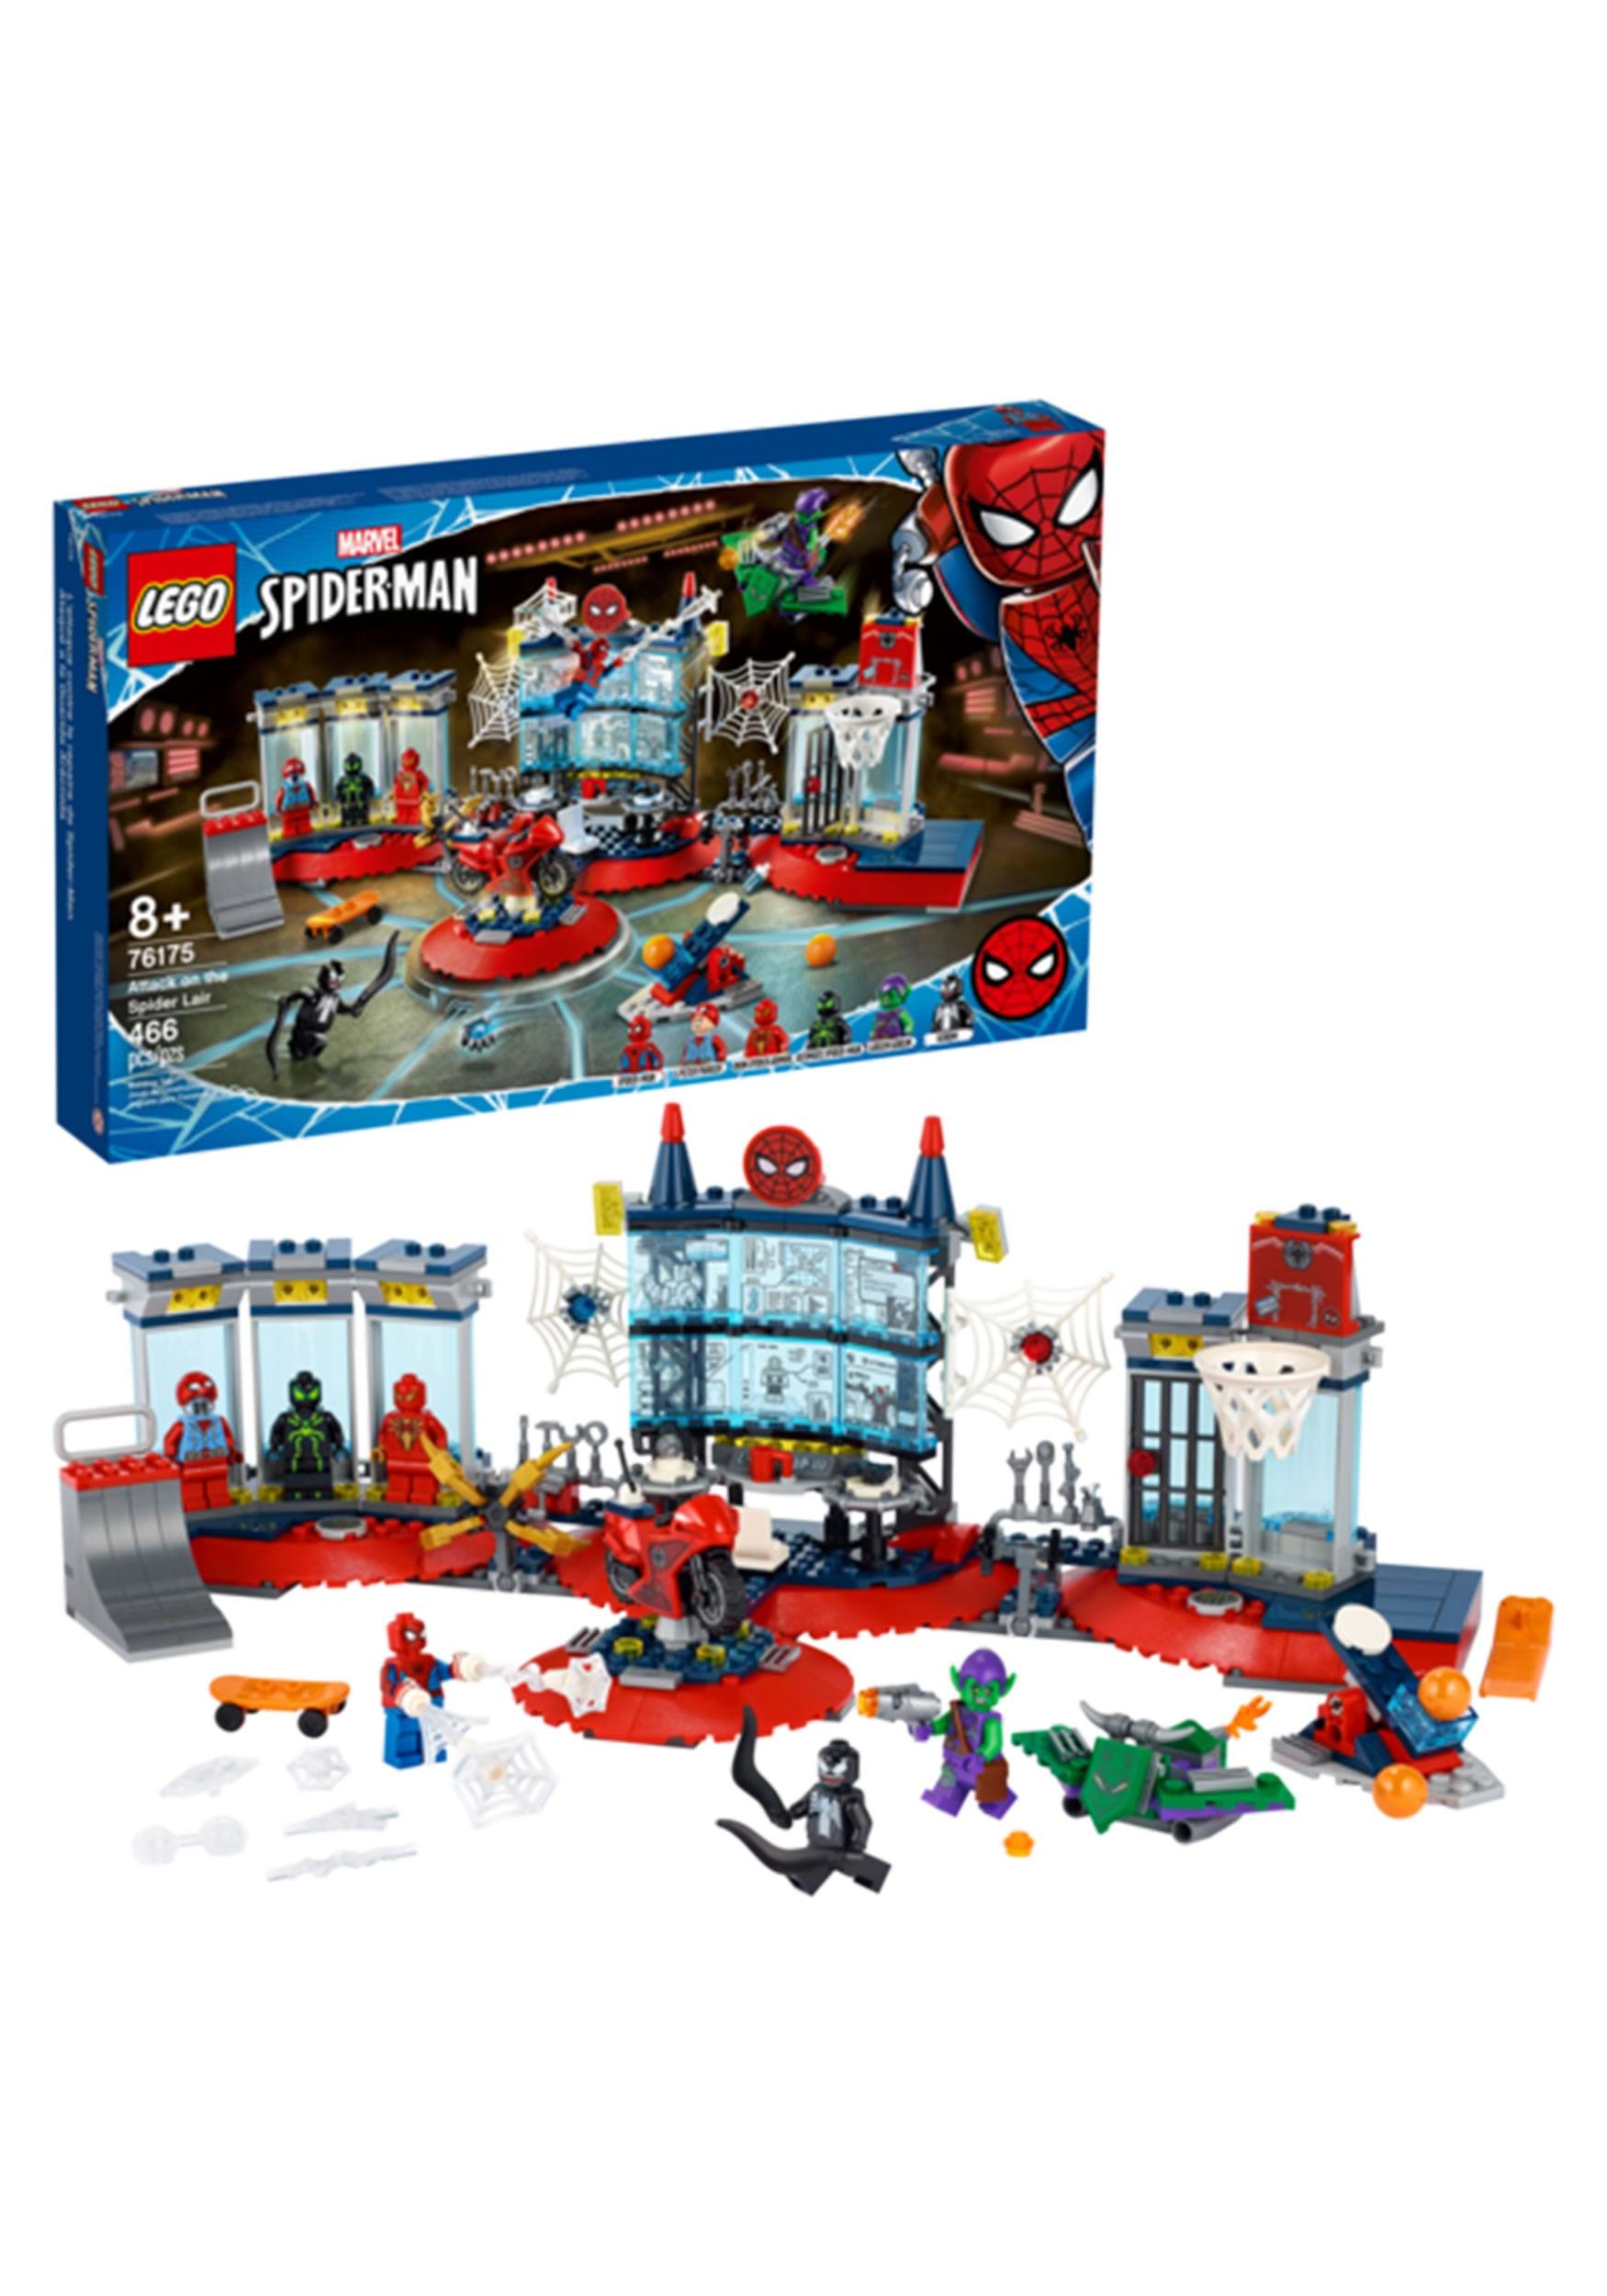 Spider-Man Attack on the Spider Lair from LEGO